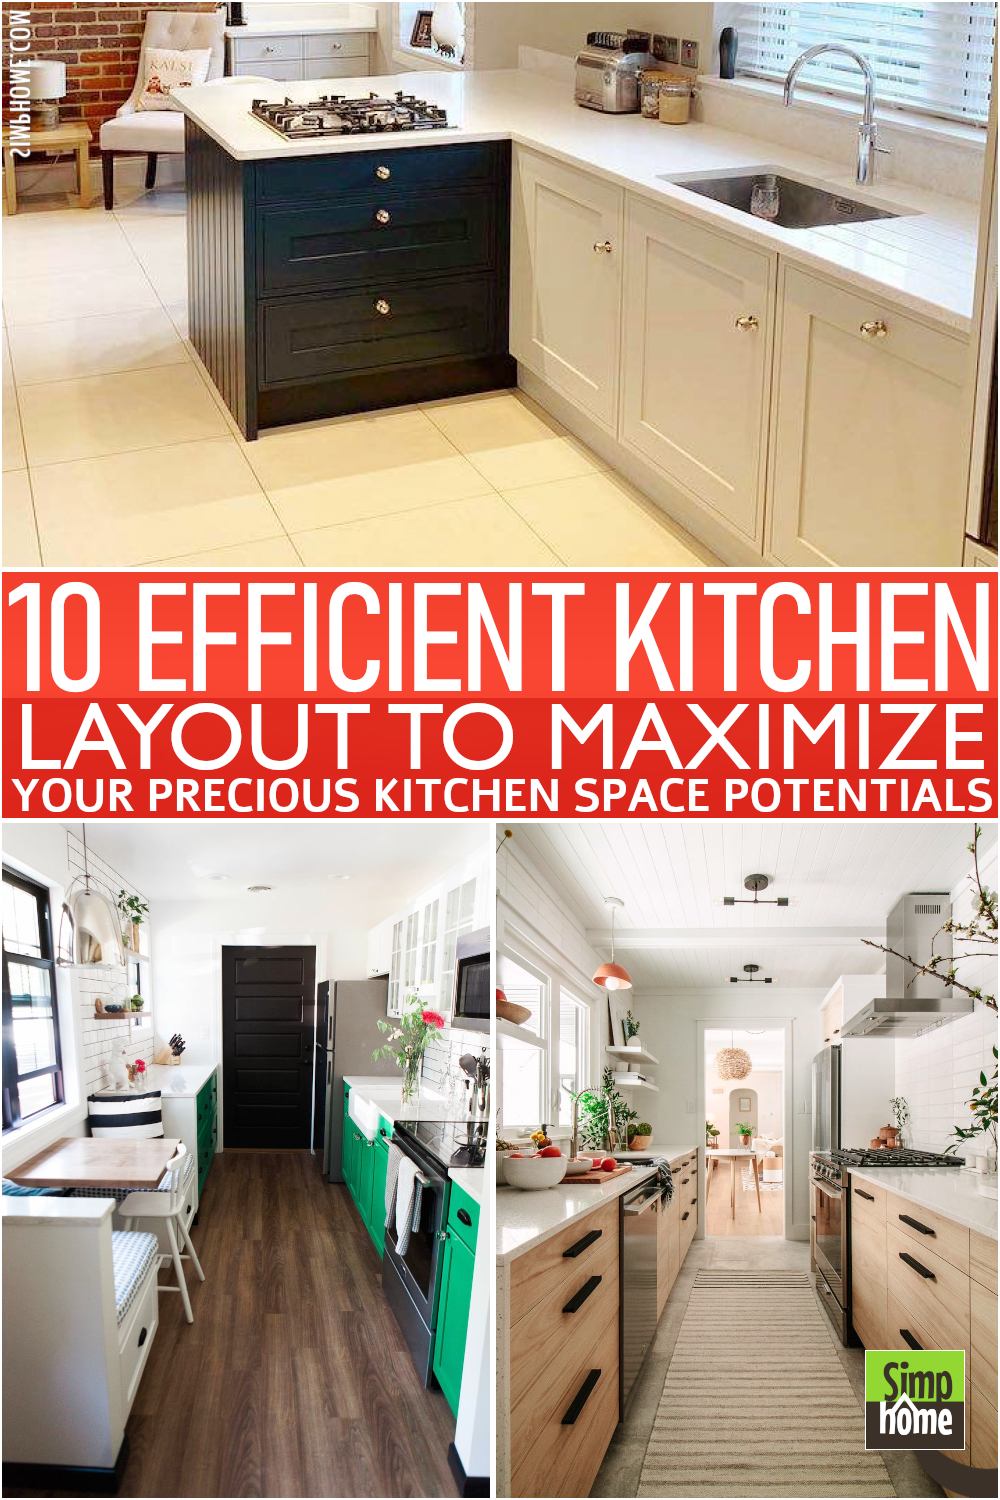 10 Efficient Kitchen Layouts to Max Your Kitchen Potential via Simphome 